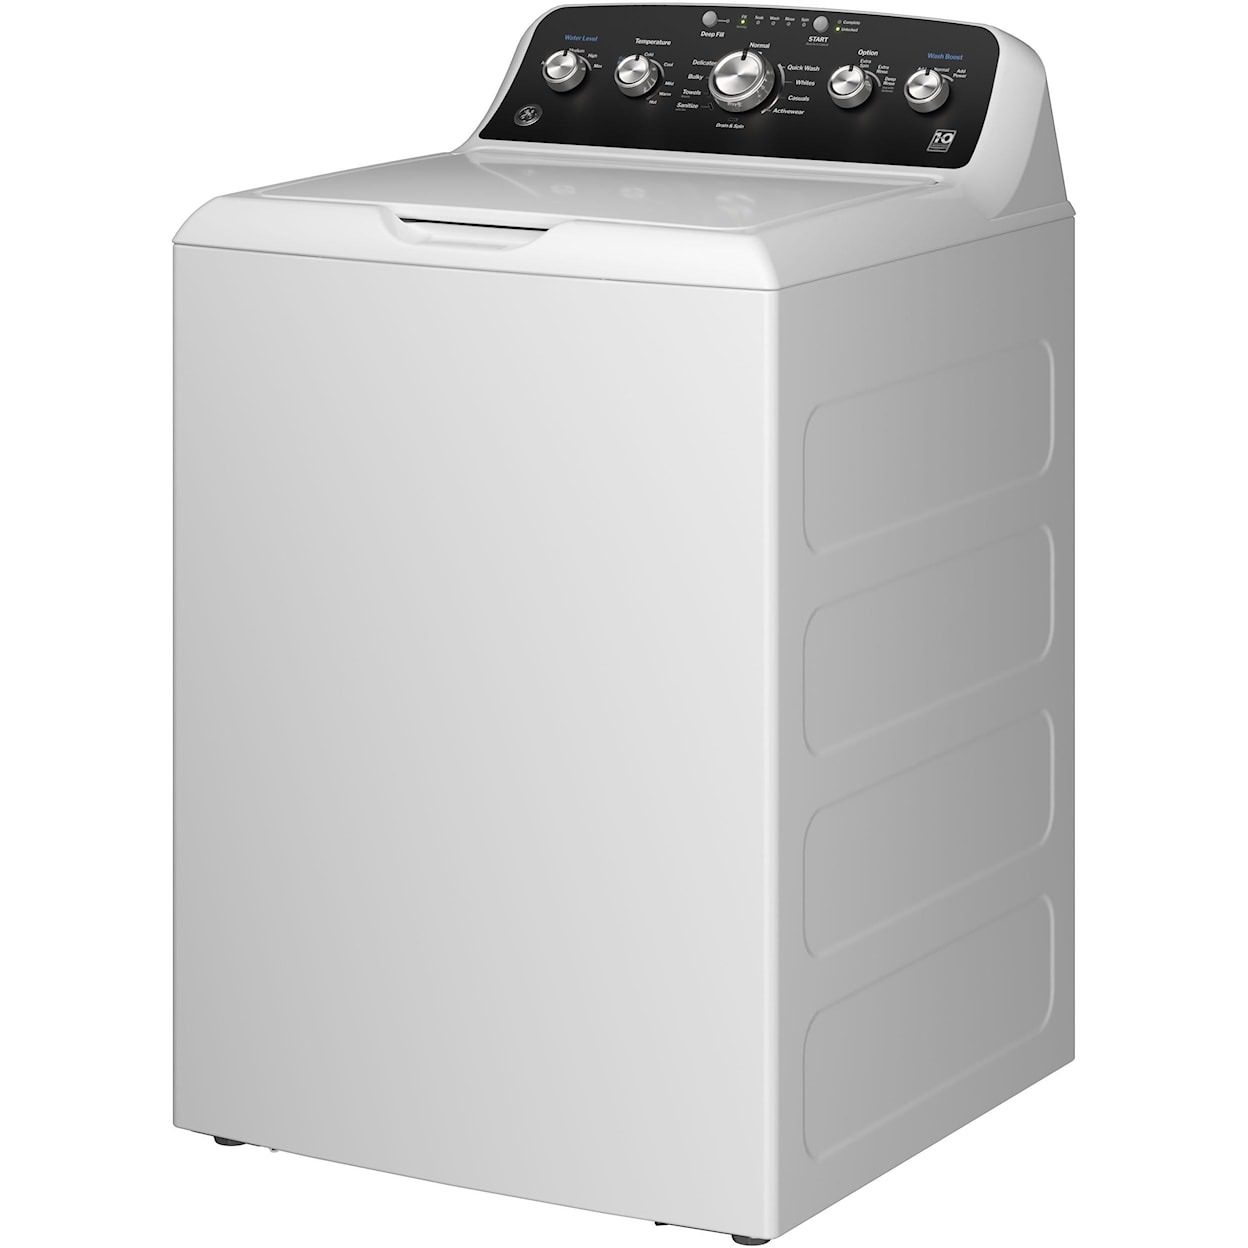 GE Appliances Laundry Traditional Top Load Washer